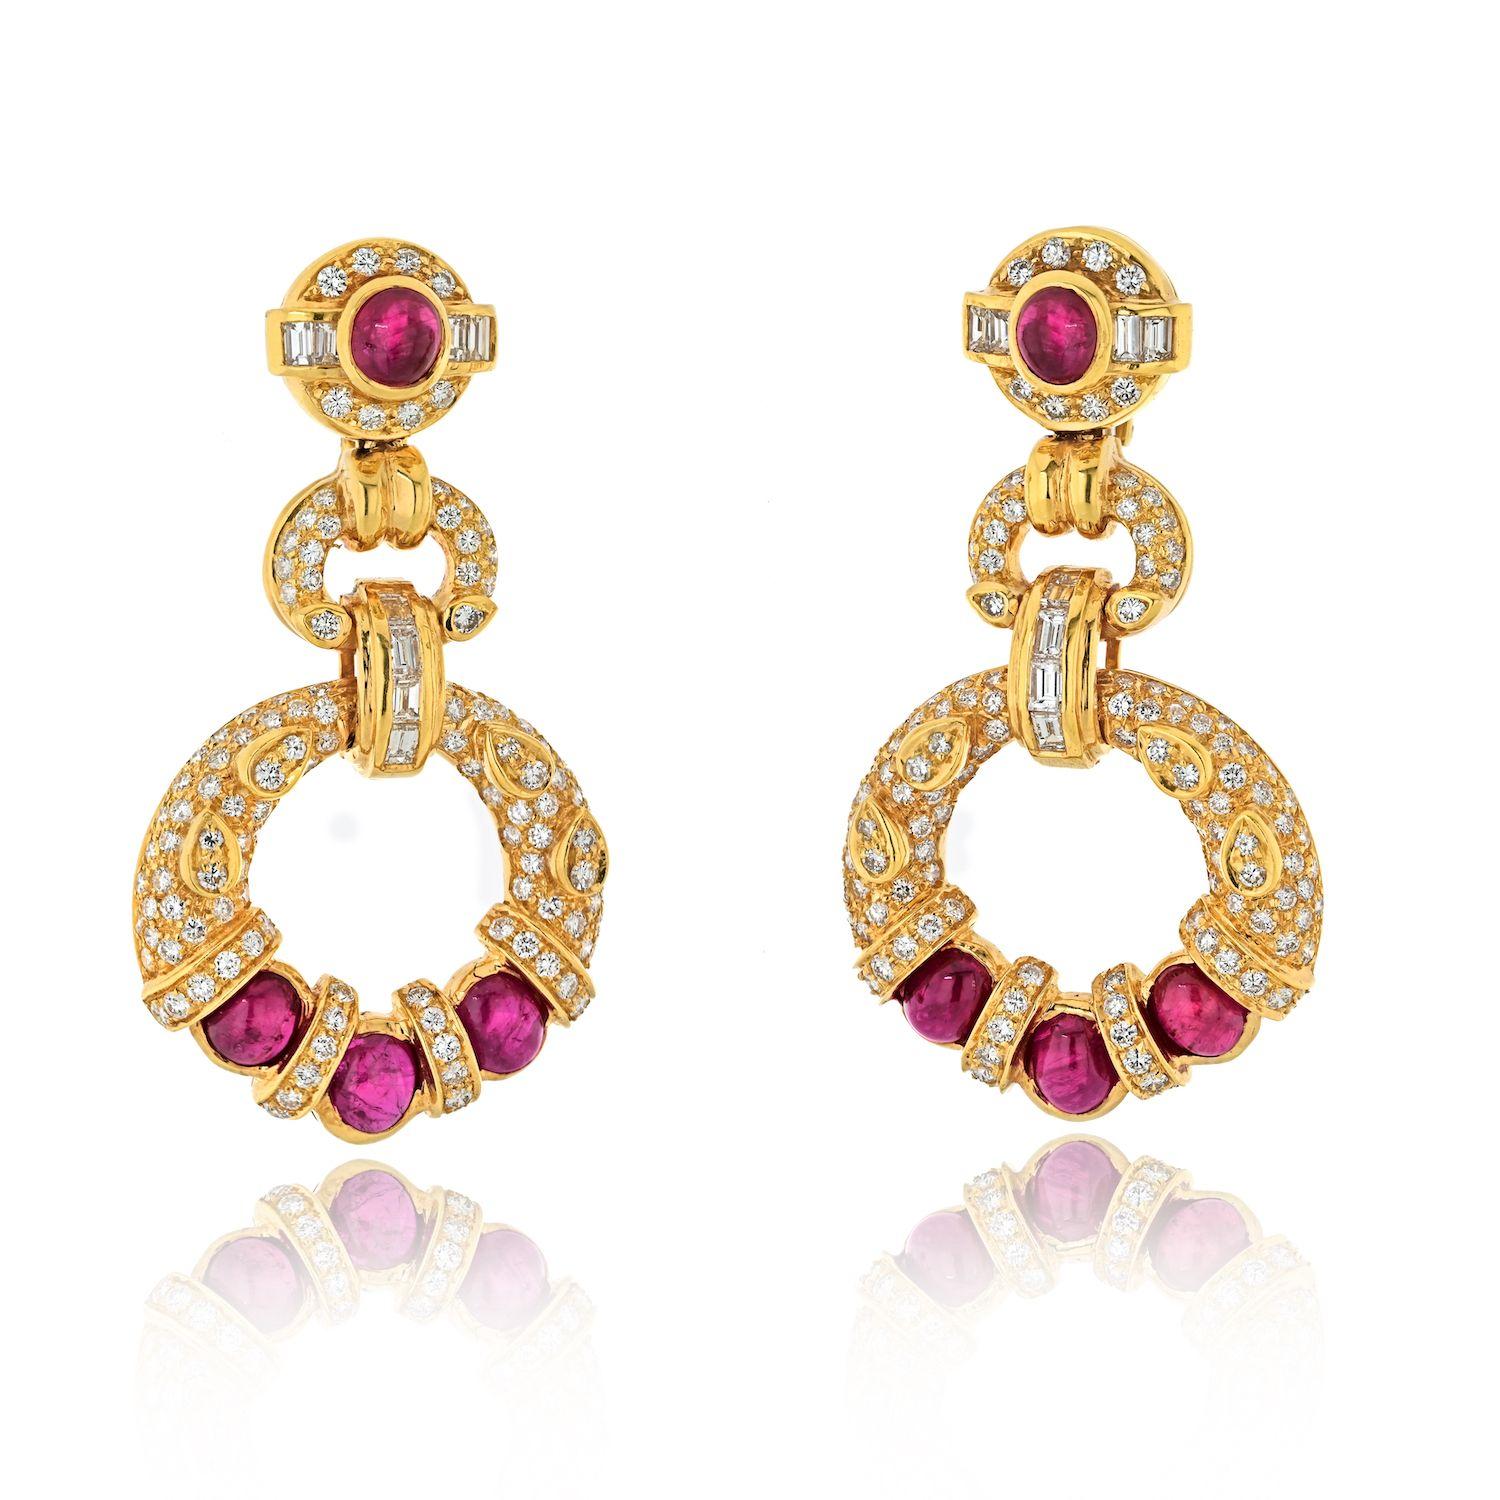 Elevate your jewelry collection with the exquisite Estate 18K Yellow Gold Diamond Ruby Doorknocker Earrings. These enchanting earrings exude a sense of timeless allure, capturing the essence of luxury in every facet. Crafted with meticulous